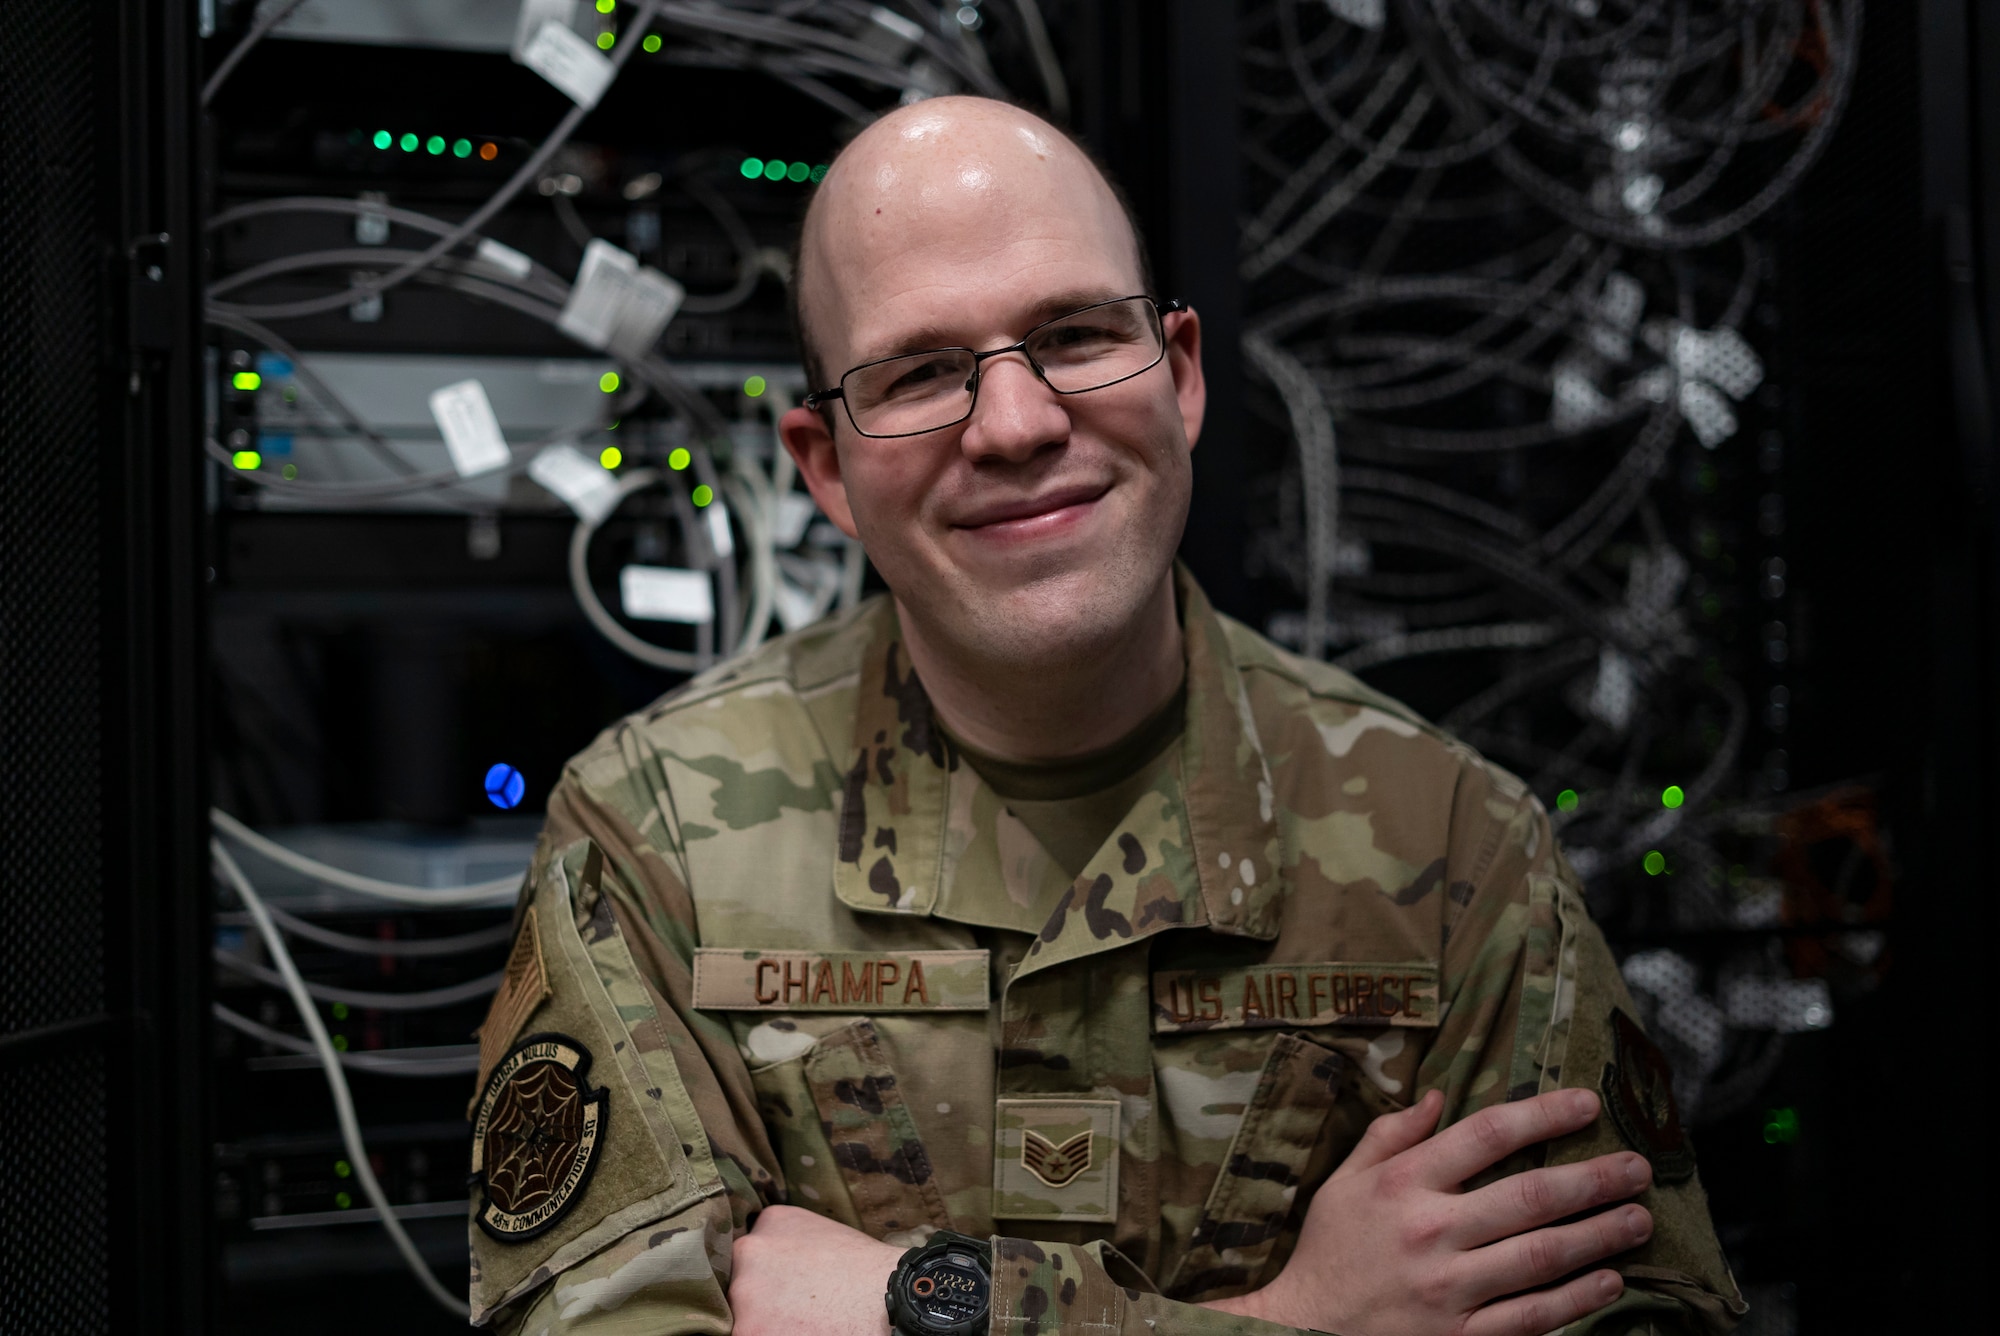 U.S. Air Force Staff Sgt. Edward Champa, 48th Communications Squadron cyber secure supervisor, sits in the server room at Royal Air Force Lakenheath, England, May 25, 2021. The 48th CS is responsible for the maintenance and care of millions of dollars worth of communications assets providing superior computer, data and voice capabilities to Royal Air Force Lakenheath and RAF Feltwell. (U.S. Air Force photo by Senior Airman Jessi Monte)